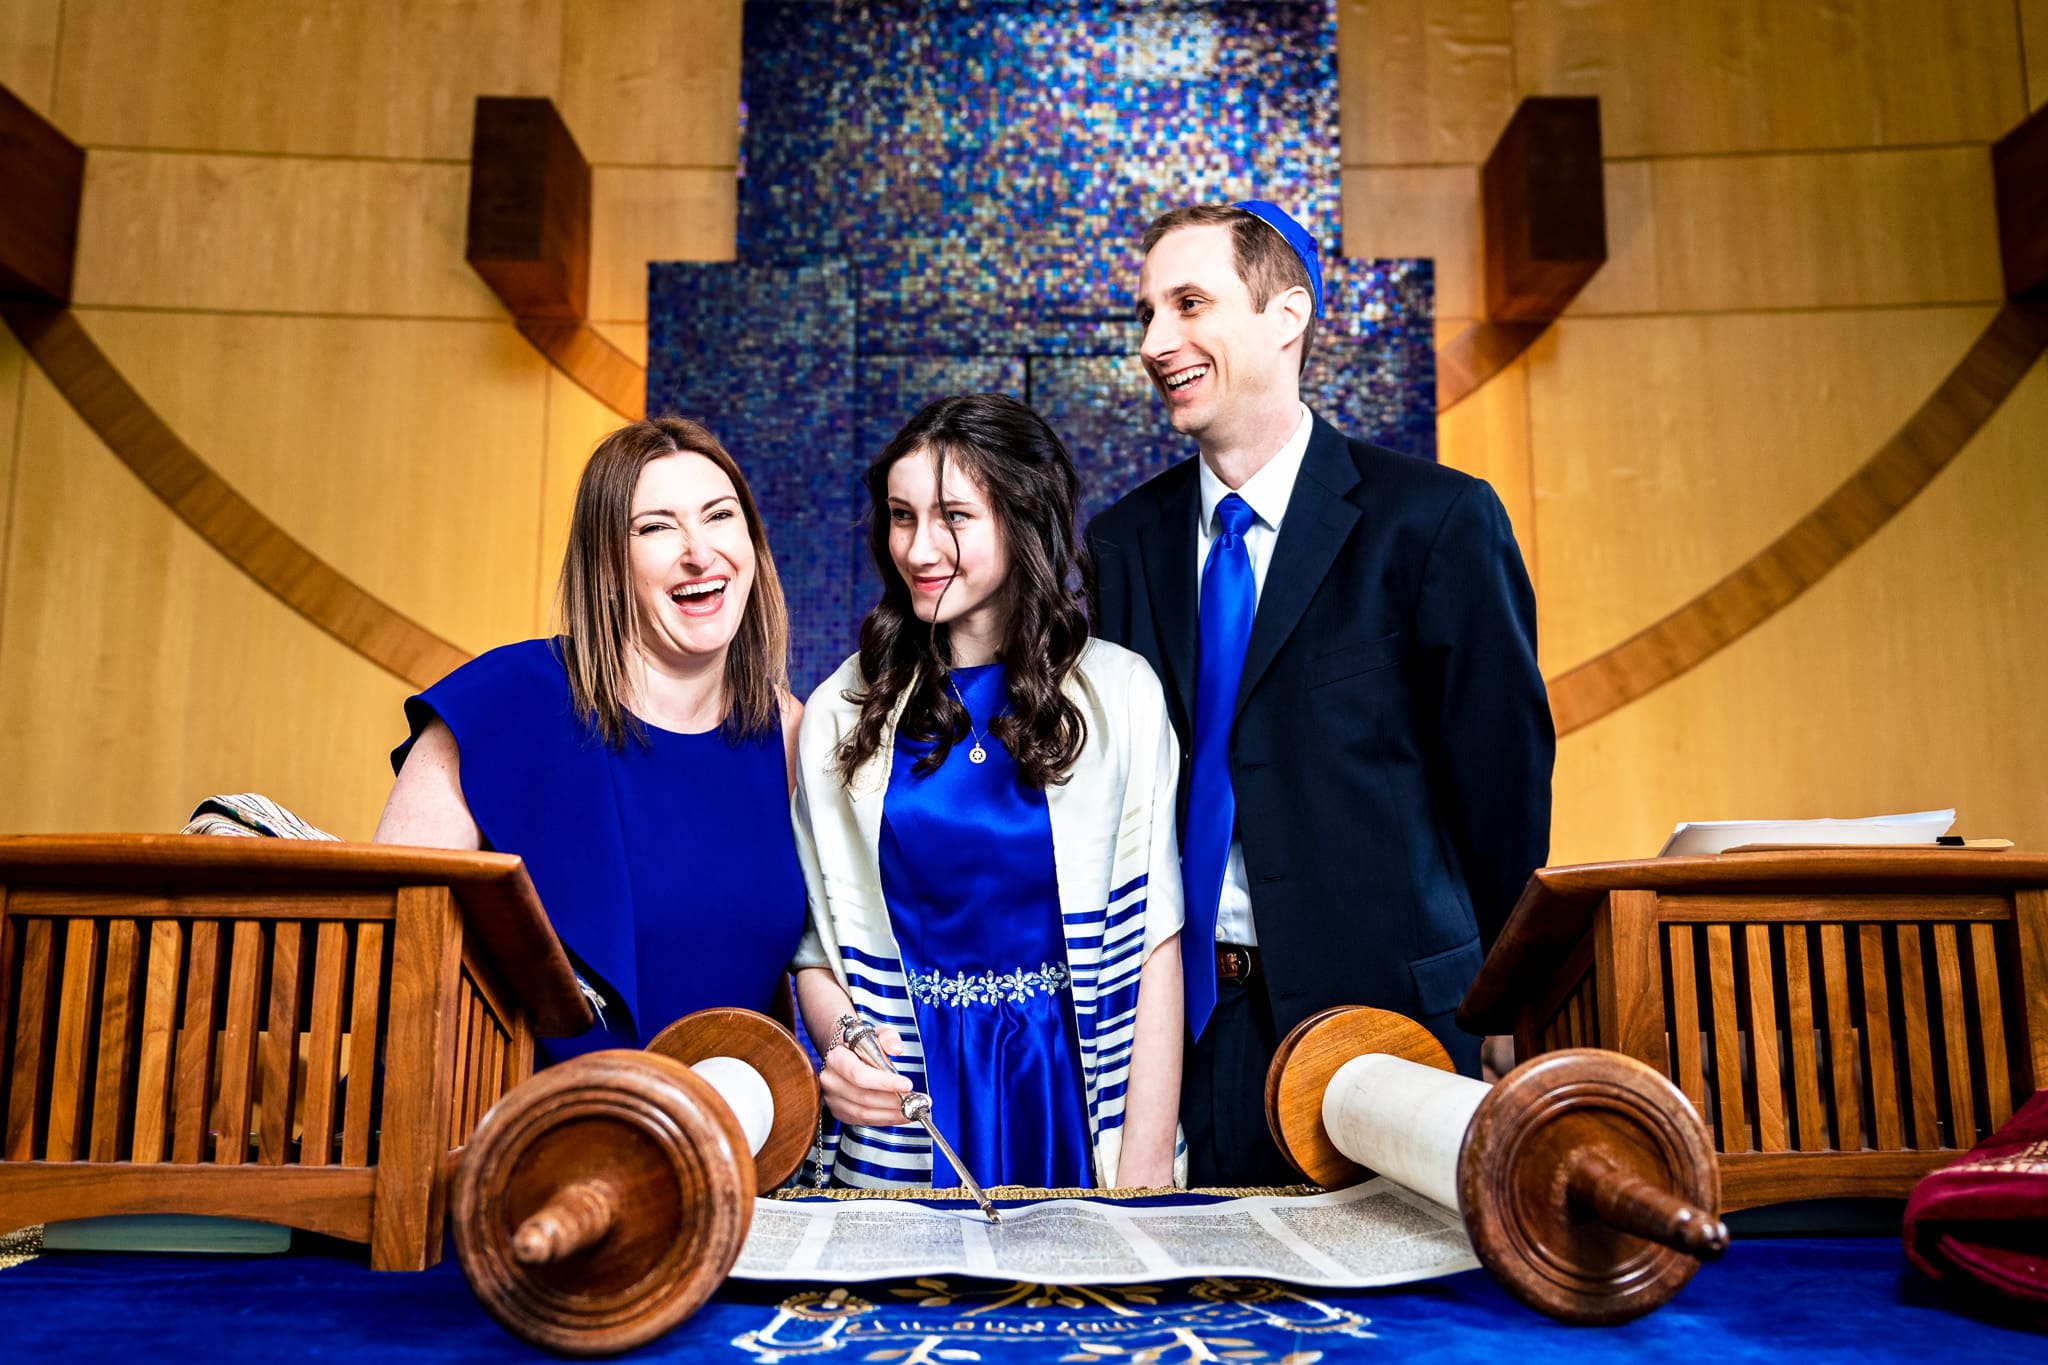 bat mitzvah girl smiles and laughs with her parents at Judea Reform Congregation in Durham, NC